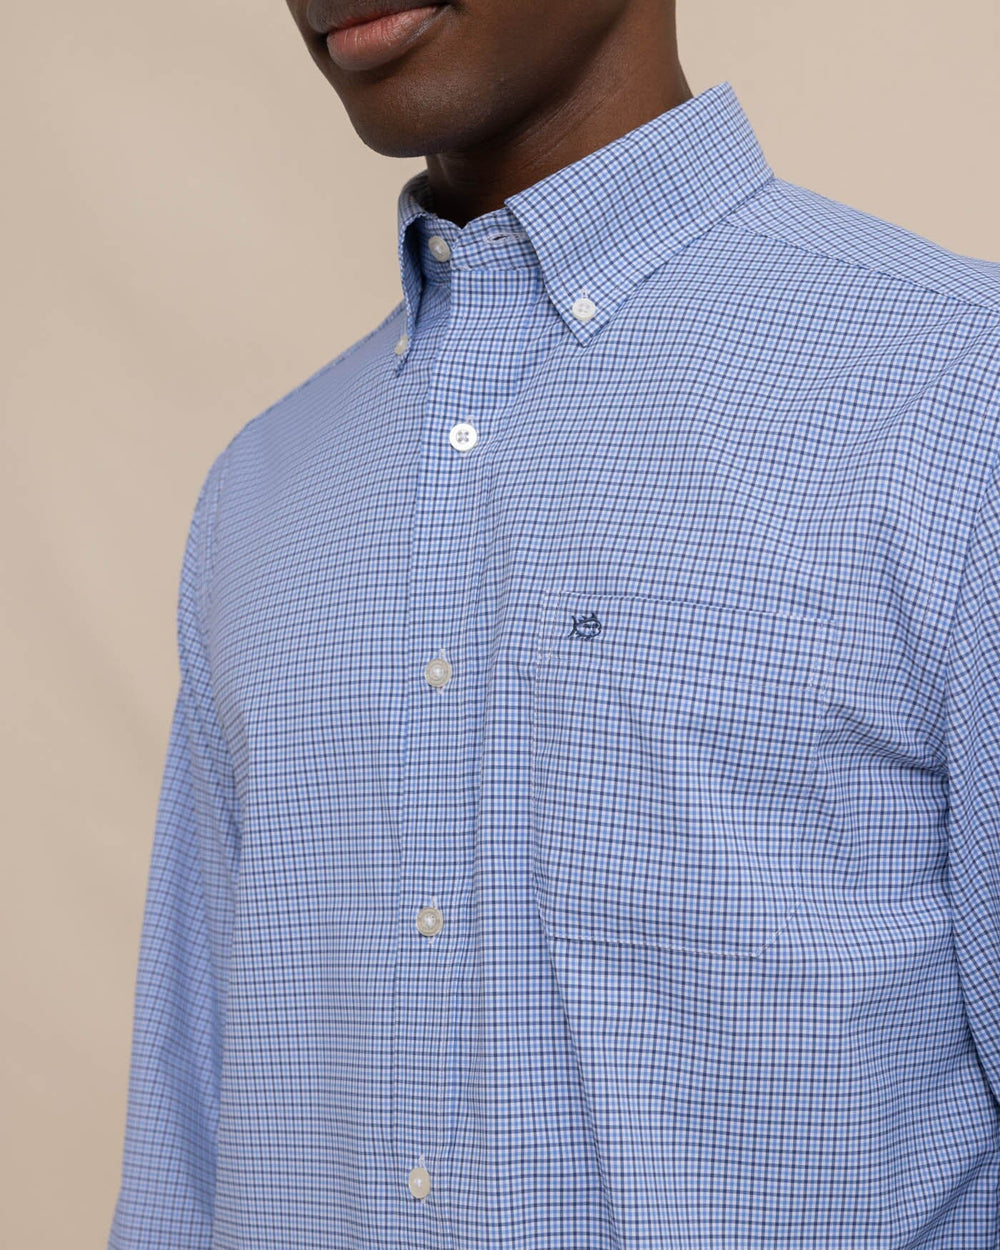 The detail view of the Southern Tide Bowry brrr°® Intercoastal Sport Shirt by Southern Tide - Seven Seas Blue